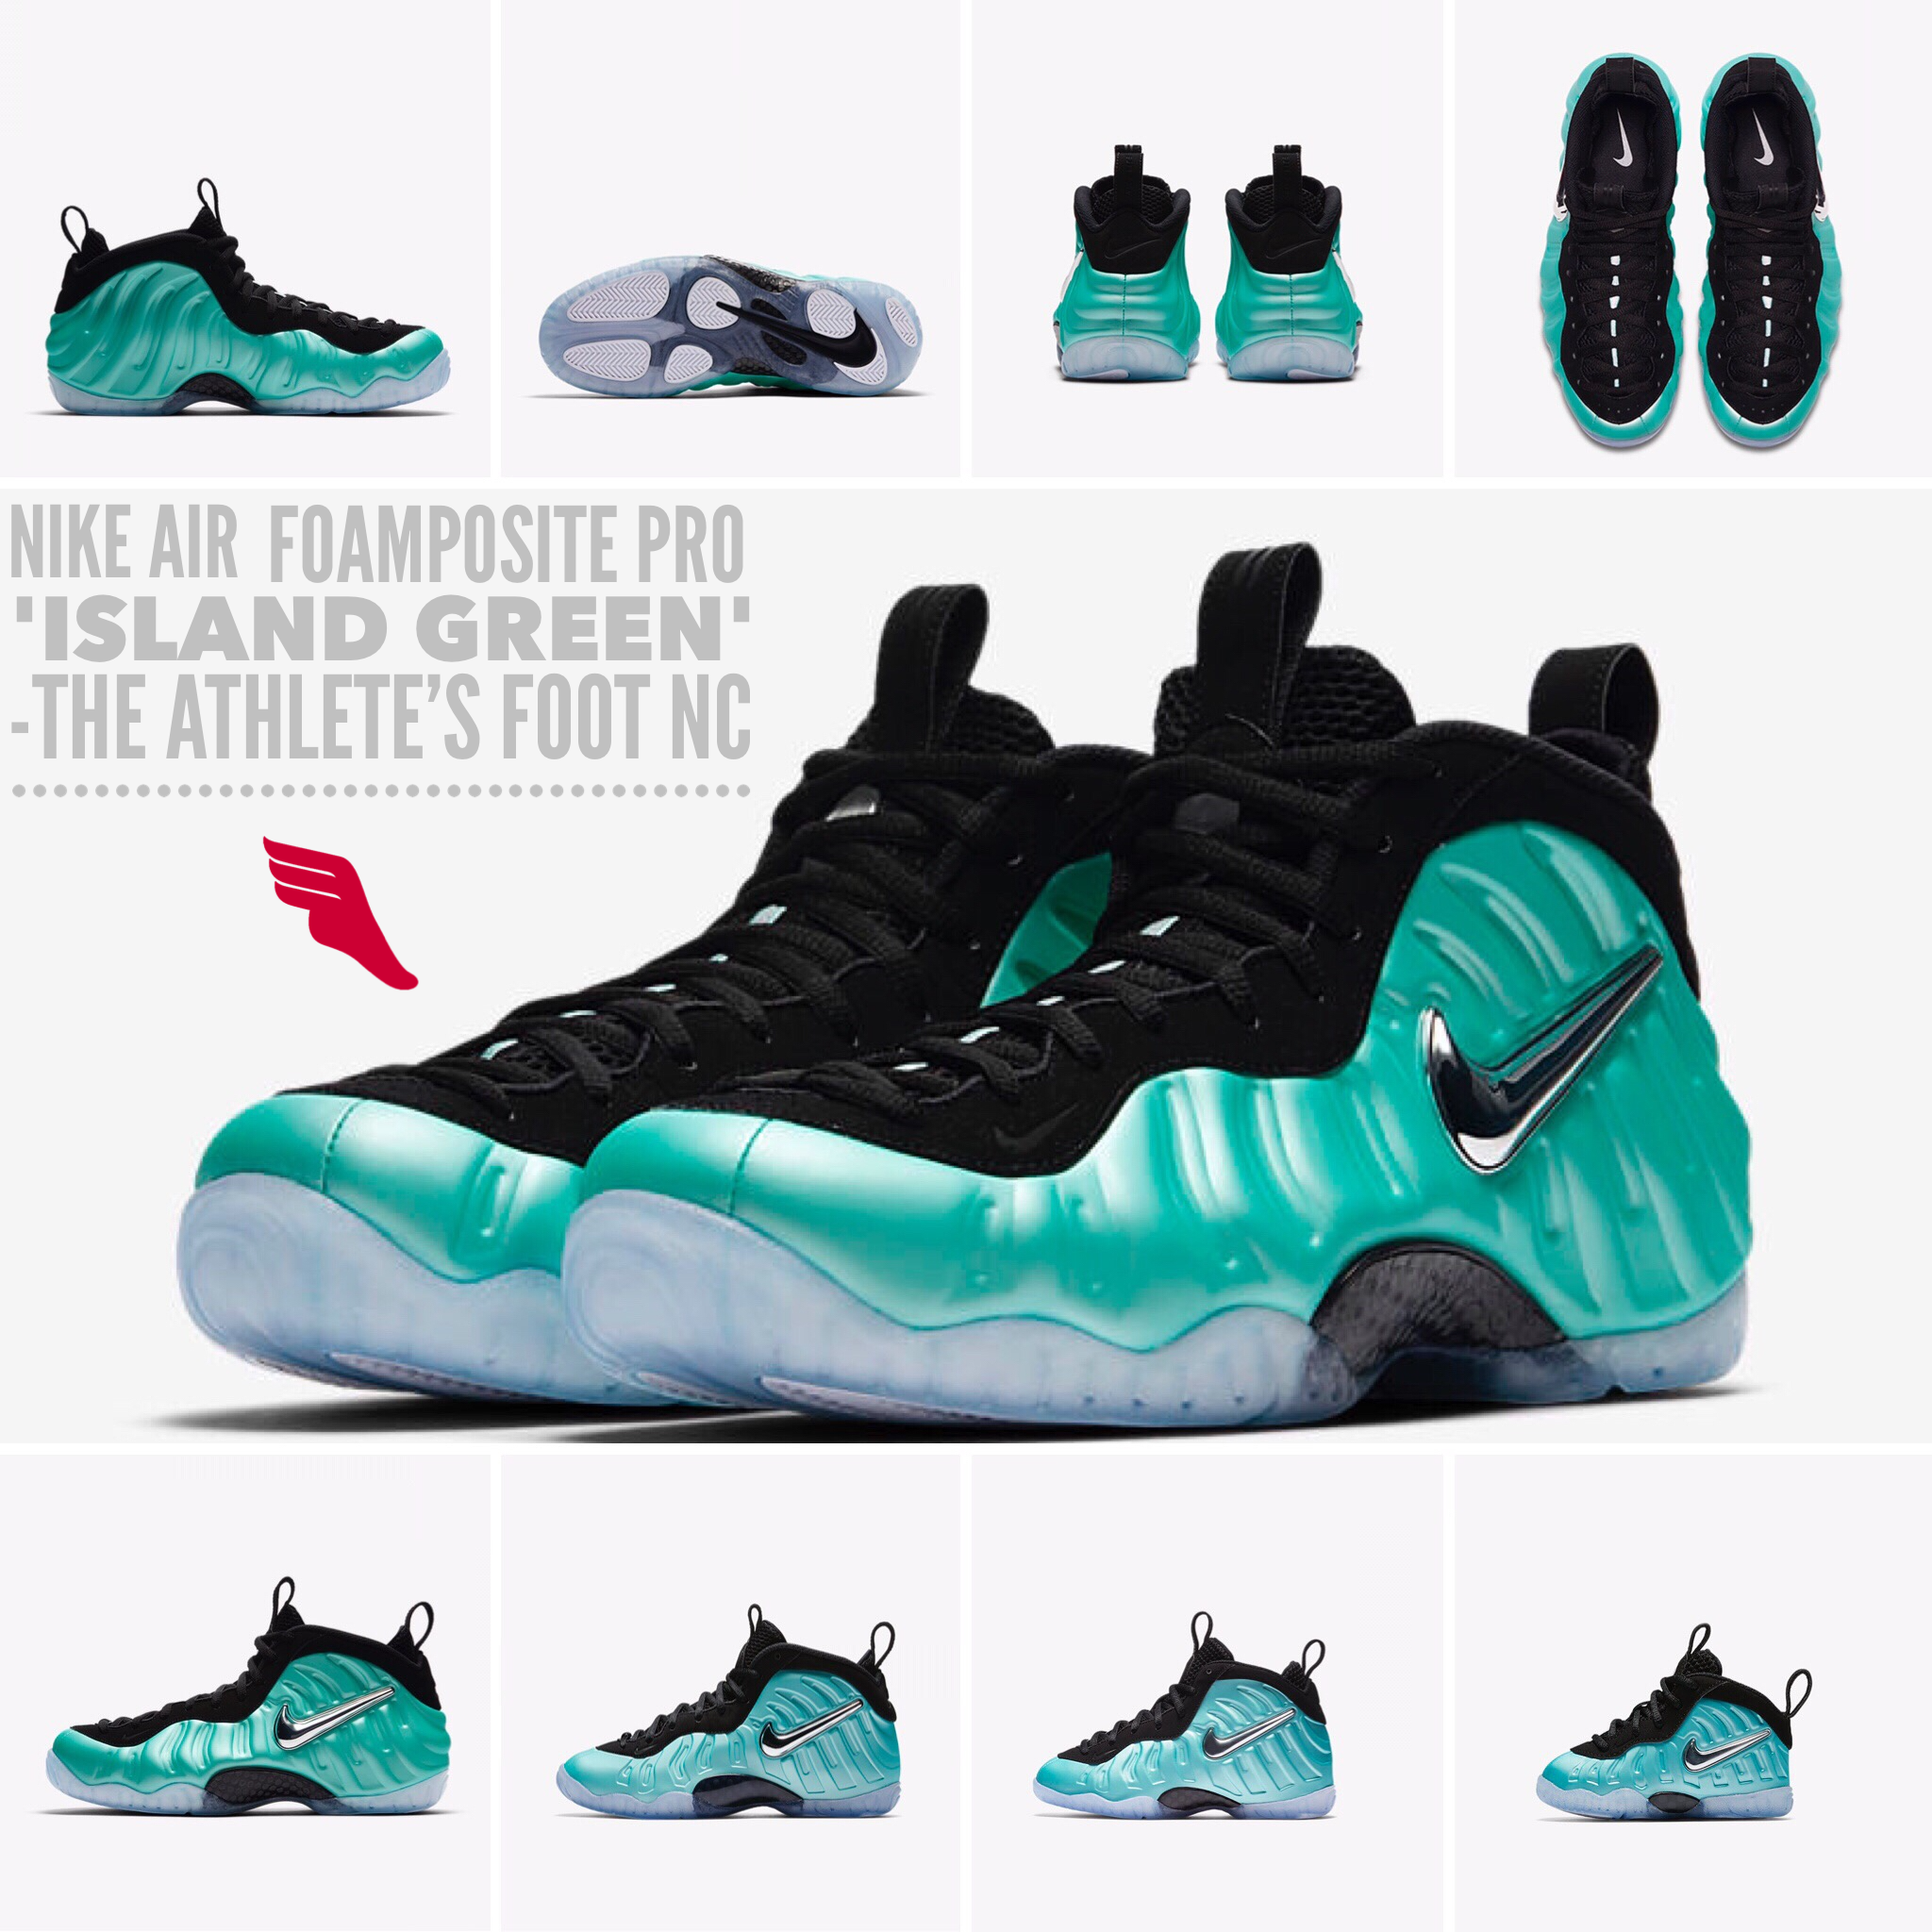 Nike Air Foamposite Pro Island Green l The Athlete's Foot NC